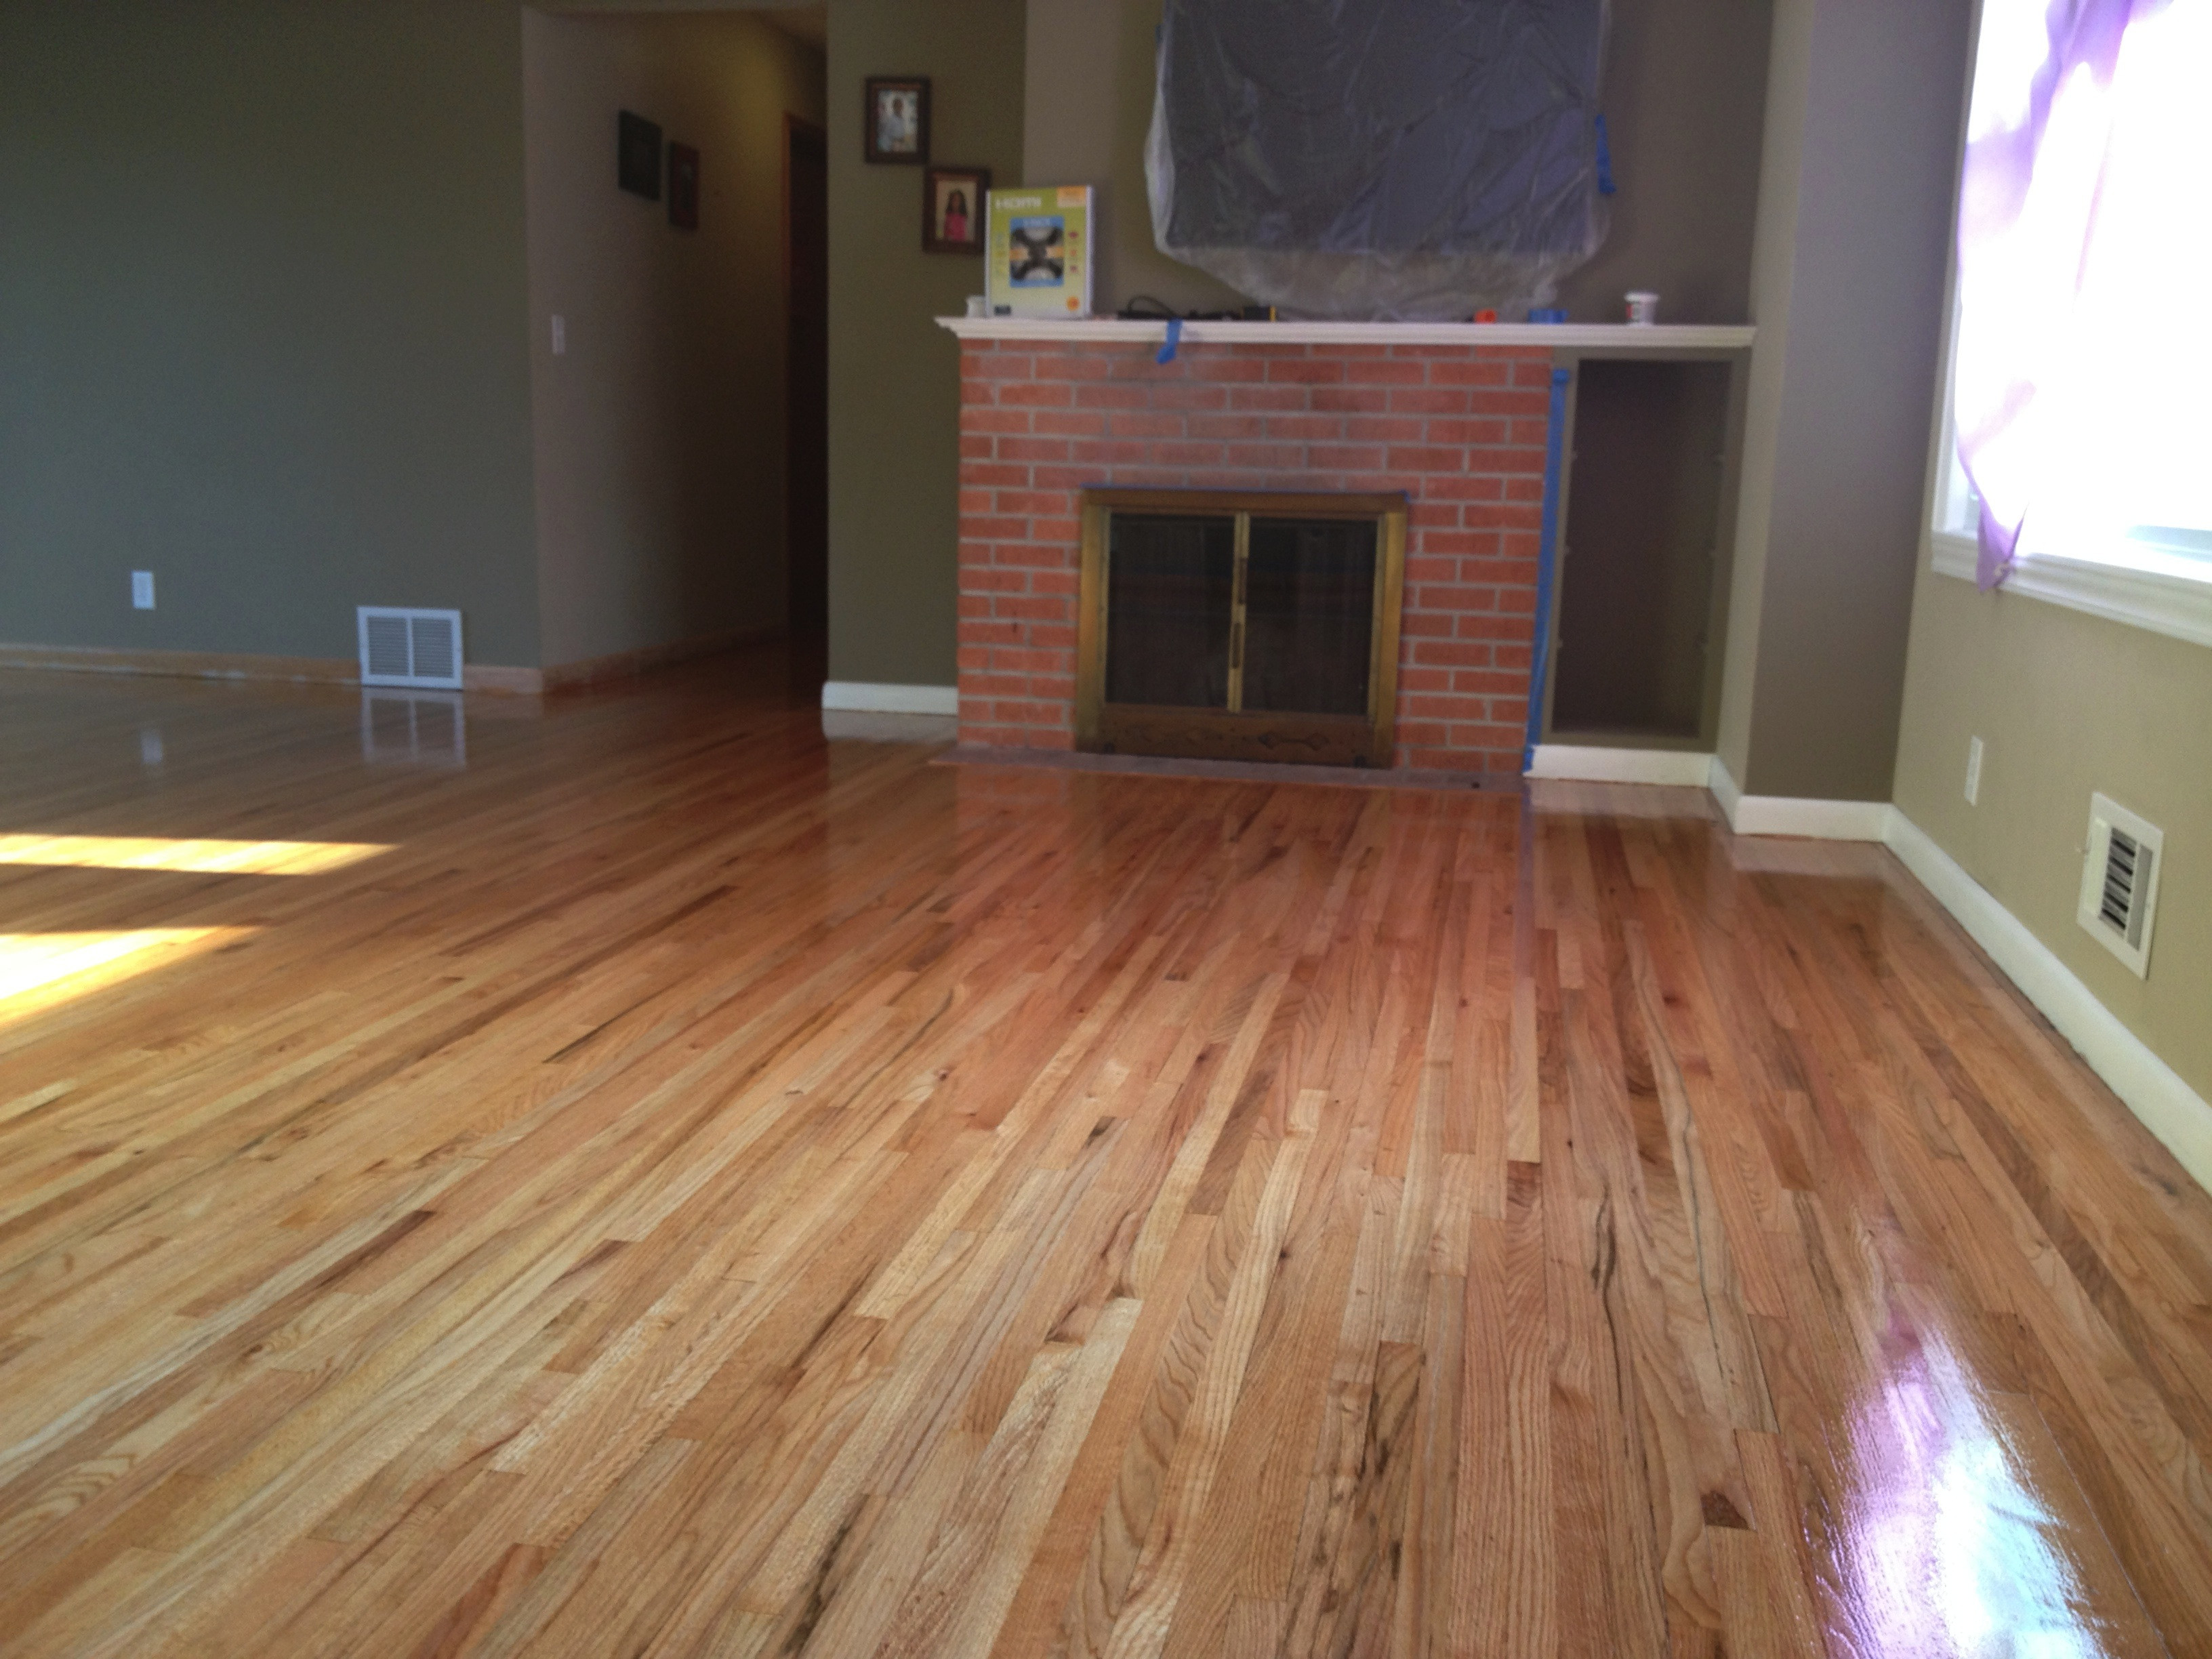 23 Elegant Cost to Pull Up Carpet and Refinish Hardwood Floors 2024 free download cost to pull up carpet and refinish hardwood floors of image 6586 from post restoring old hardwood floors will with intended for easy hardwood floor refinishing kitchen set restoring old flo